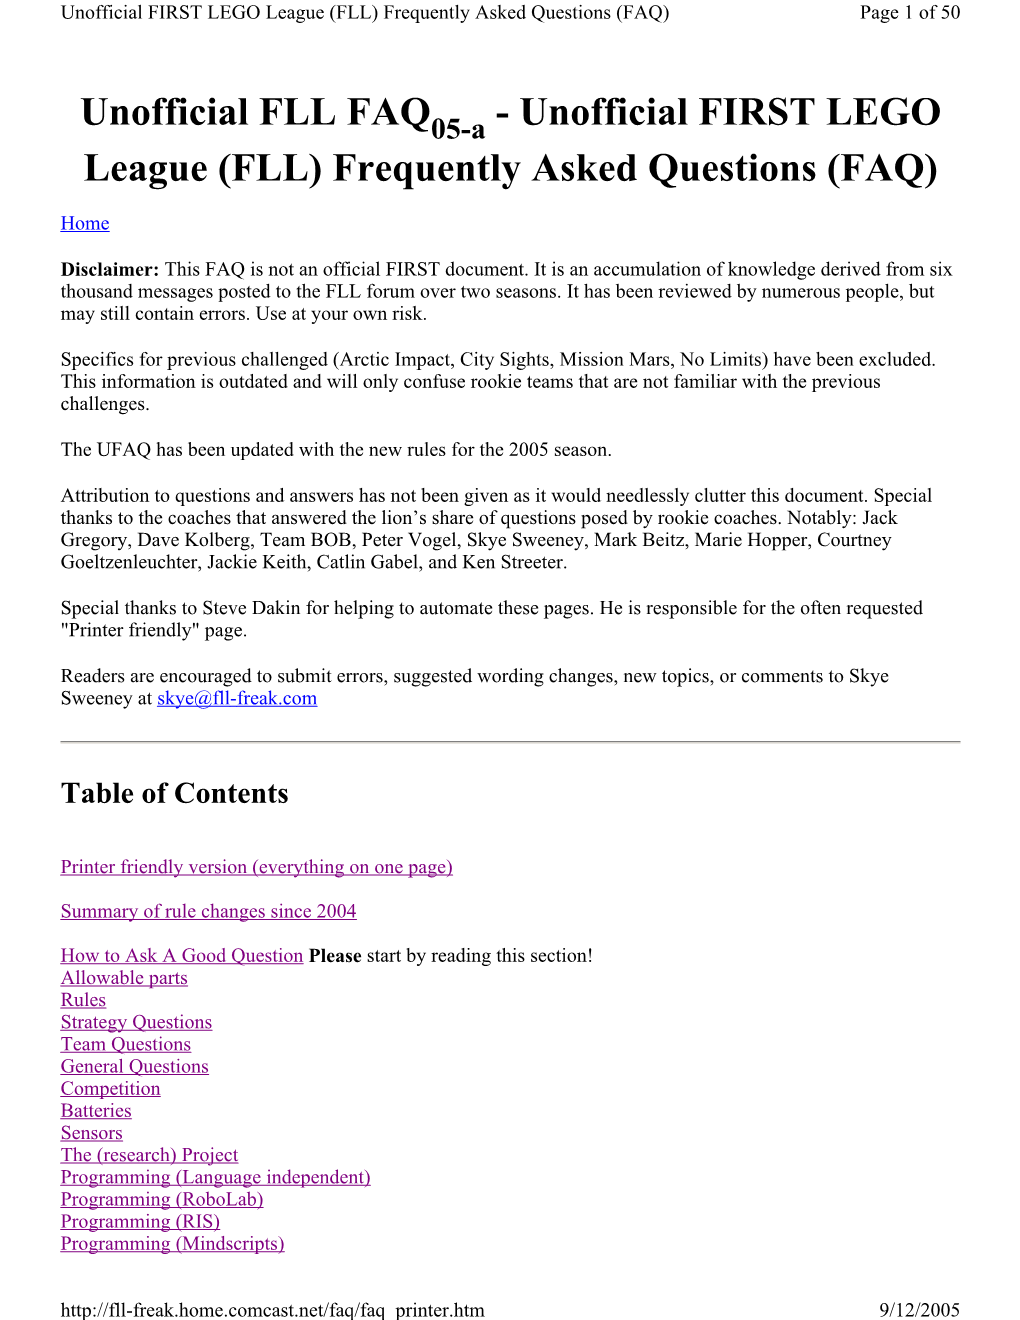 Unofficial FIRST LEGO League (FLL) Frequently Asked Questions (FAQ) Page 1 of 50